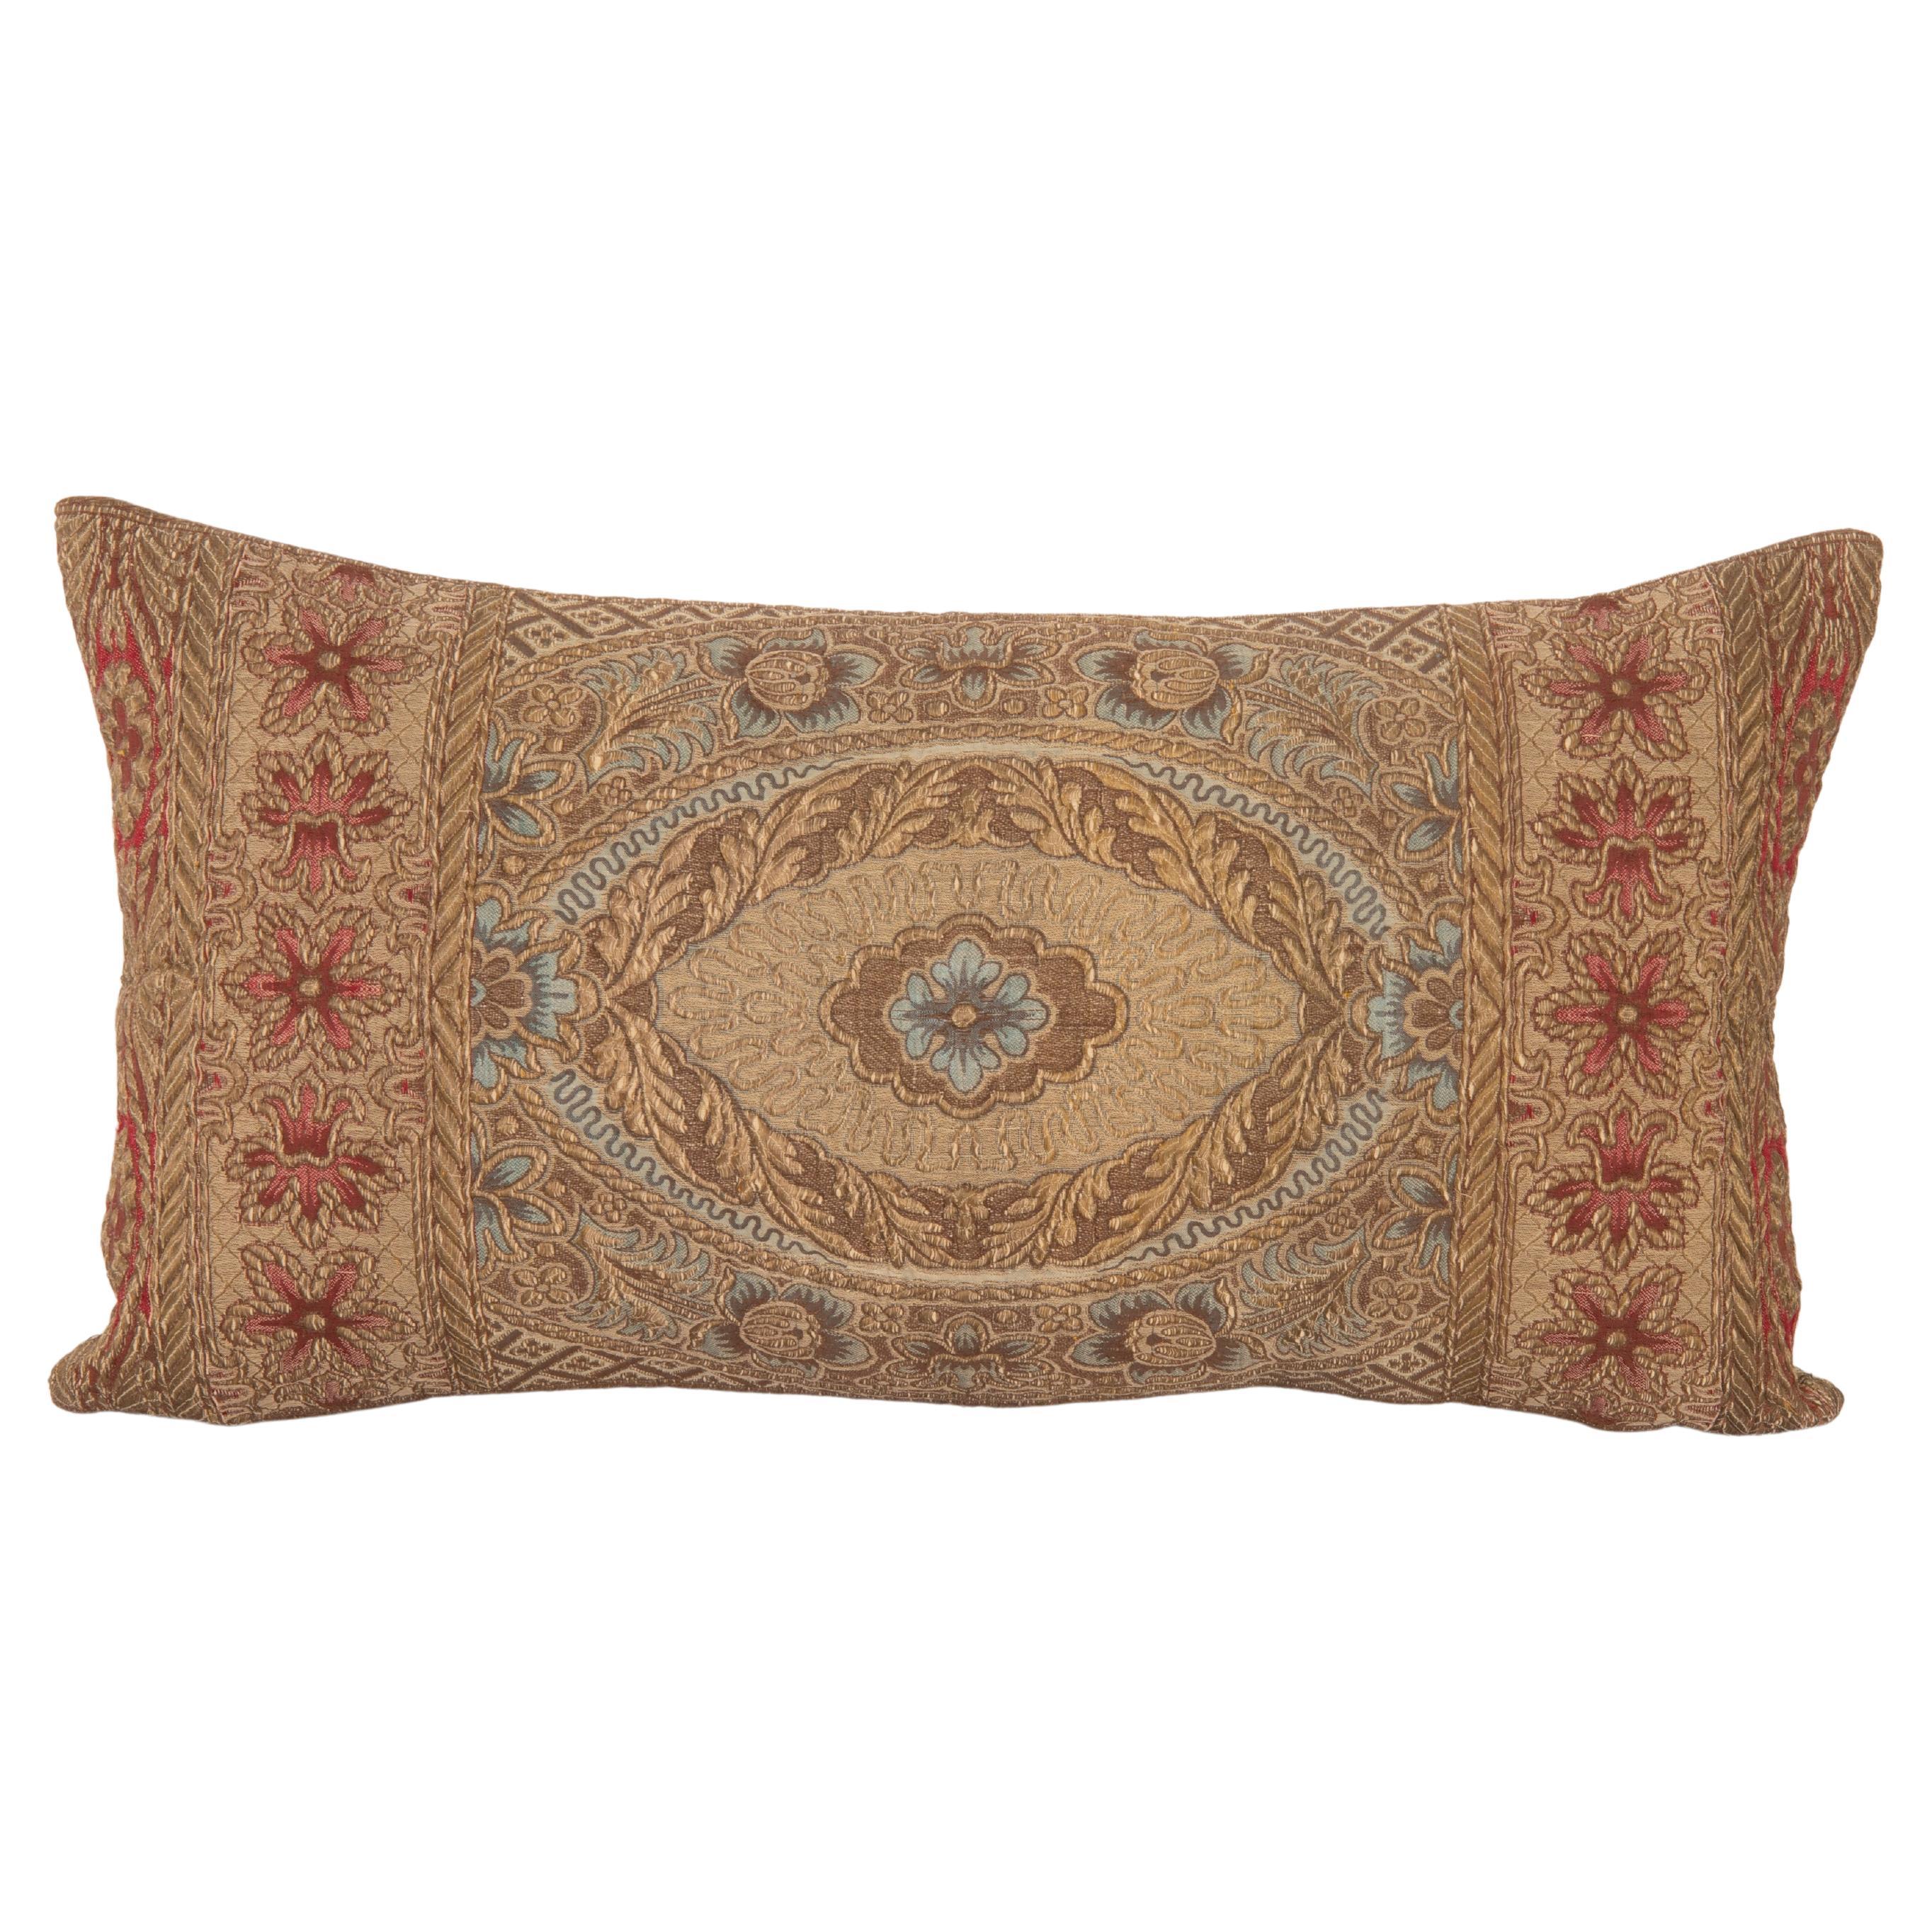 Pillow Cover Made from an early 20th C. Italian Embroidery For Sale